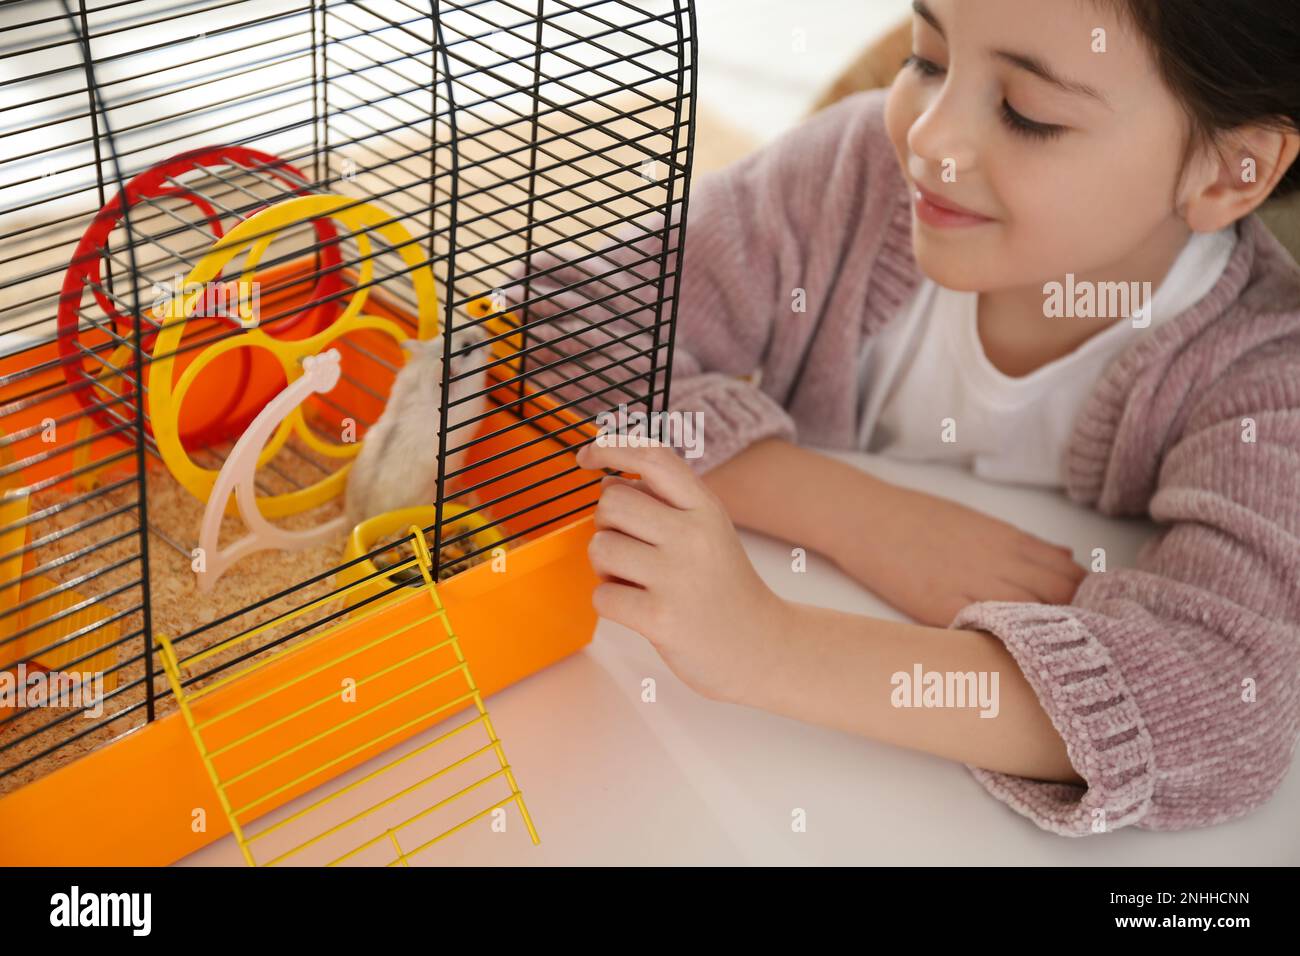 Little girl and her hamster in cage at home Stock Photo